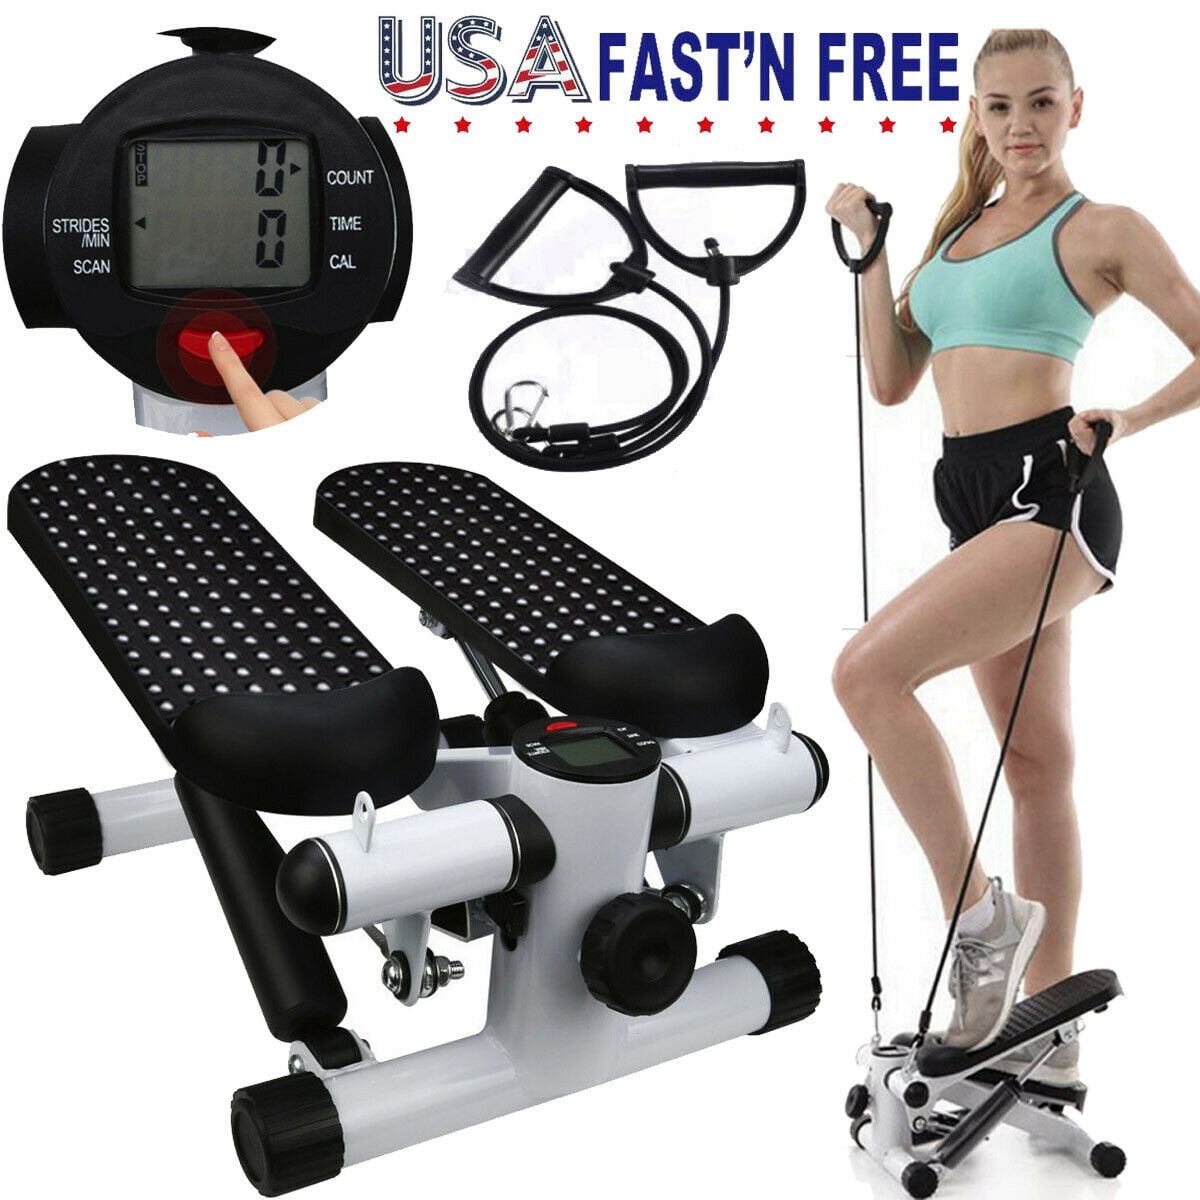 New Exercise Twist Stepper Stair Machine with Rope Mat Leg Arm Training Fitness 